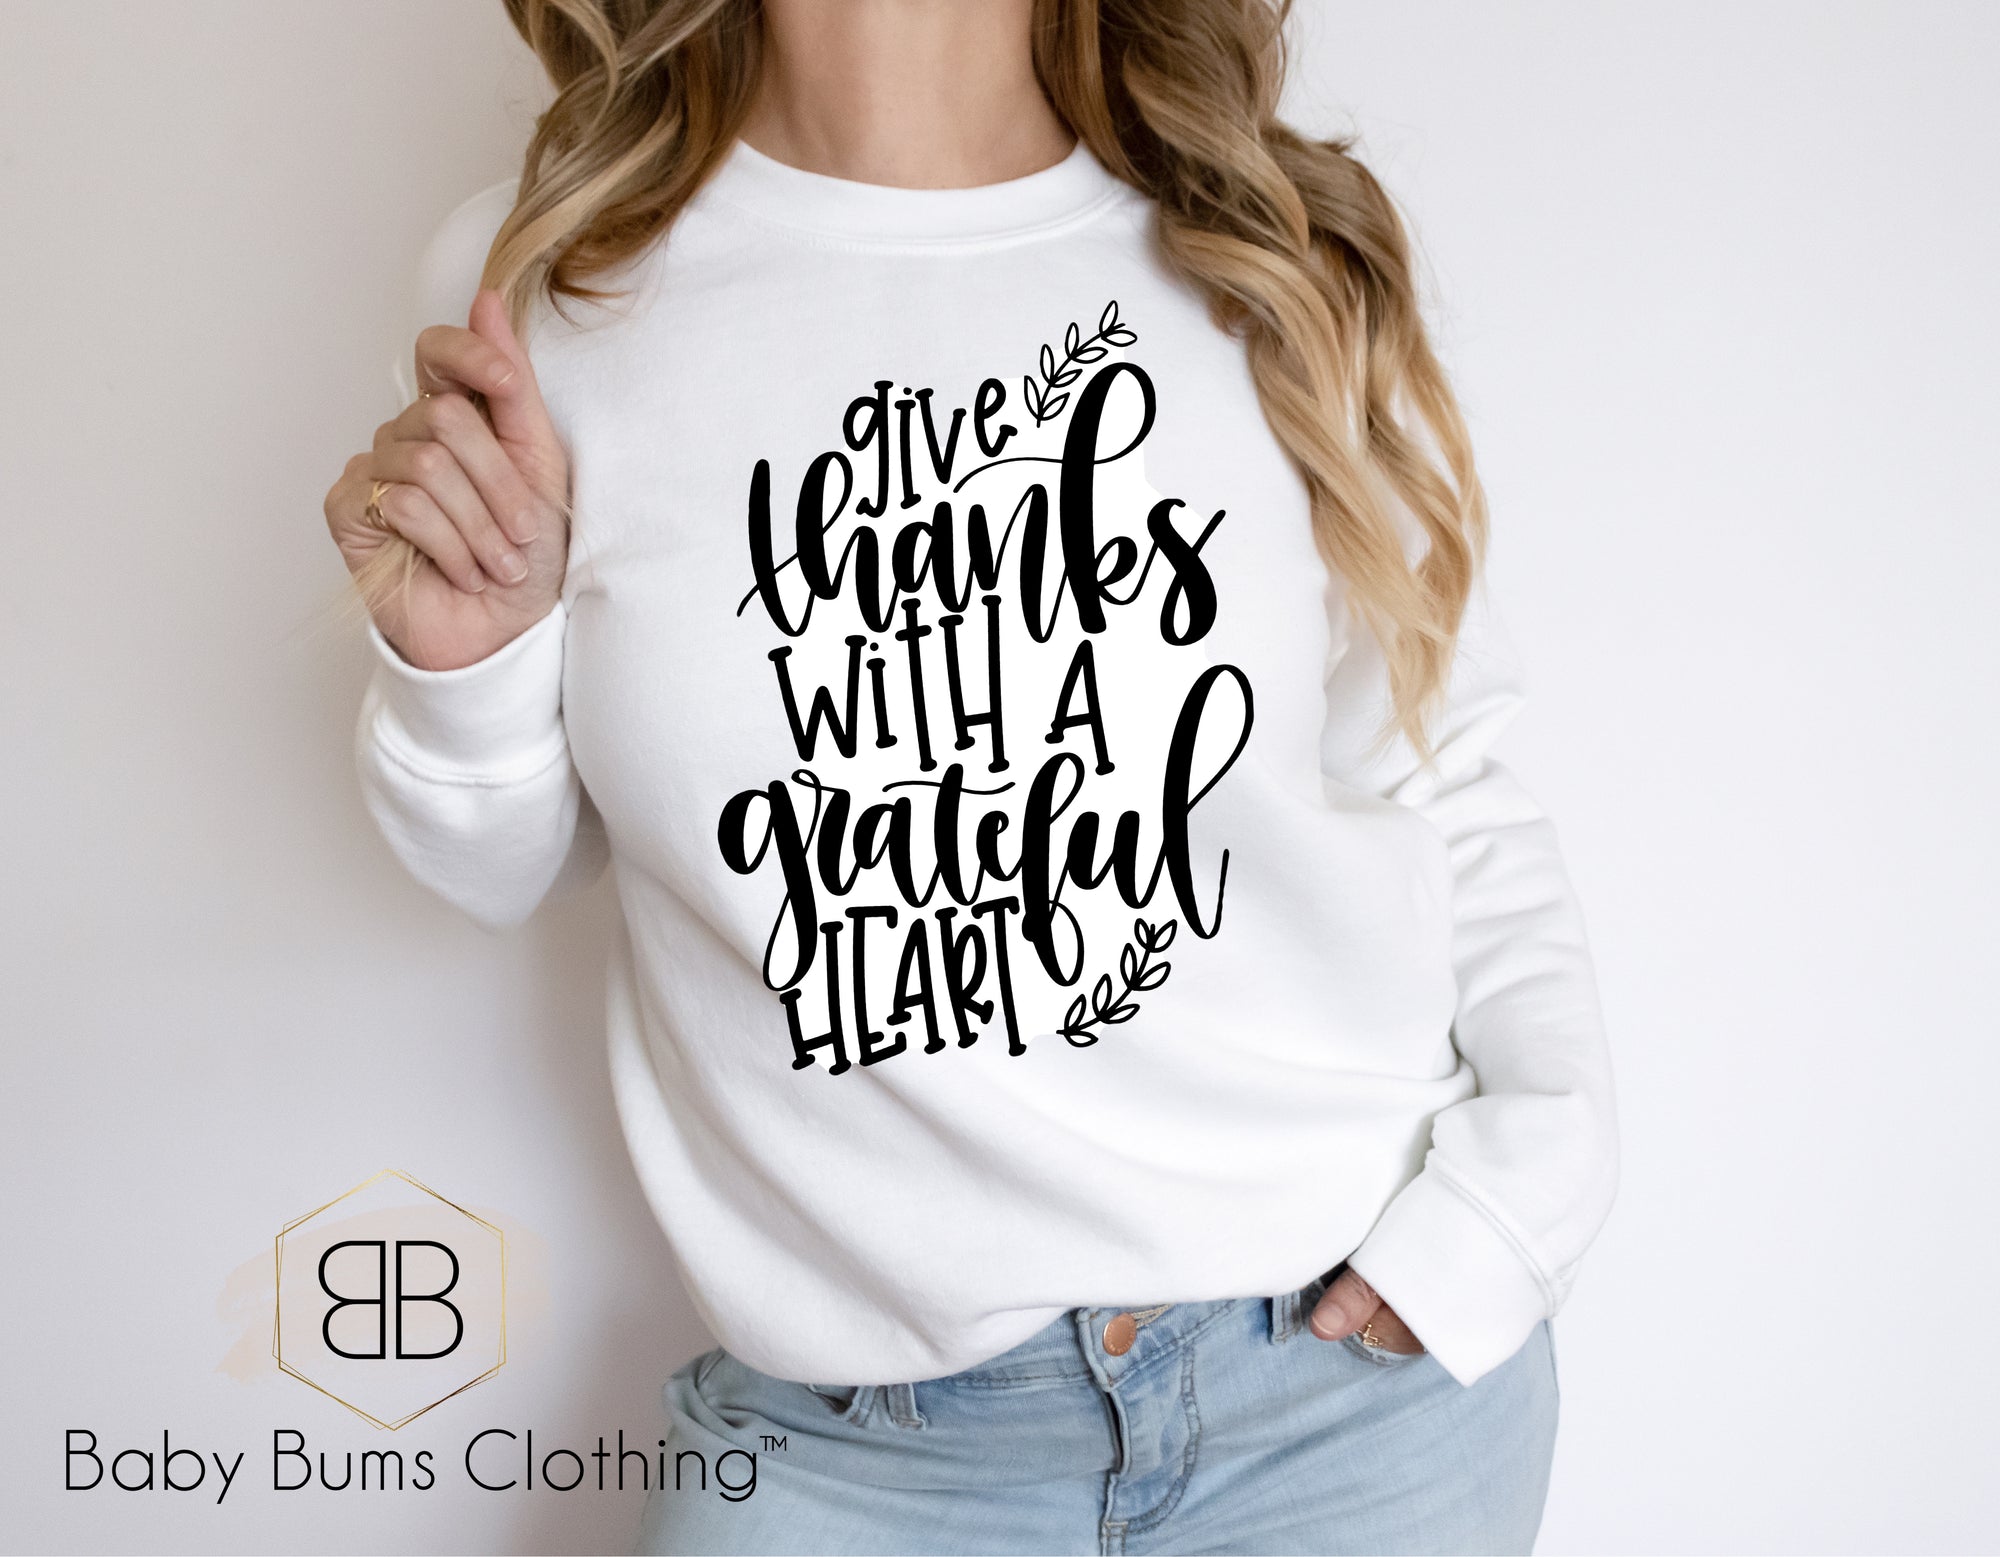 GIVE THANKS WITH A GRATEFUL HEART ADULT UNISEX T-SHIRT - Baby Bums Clothing 